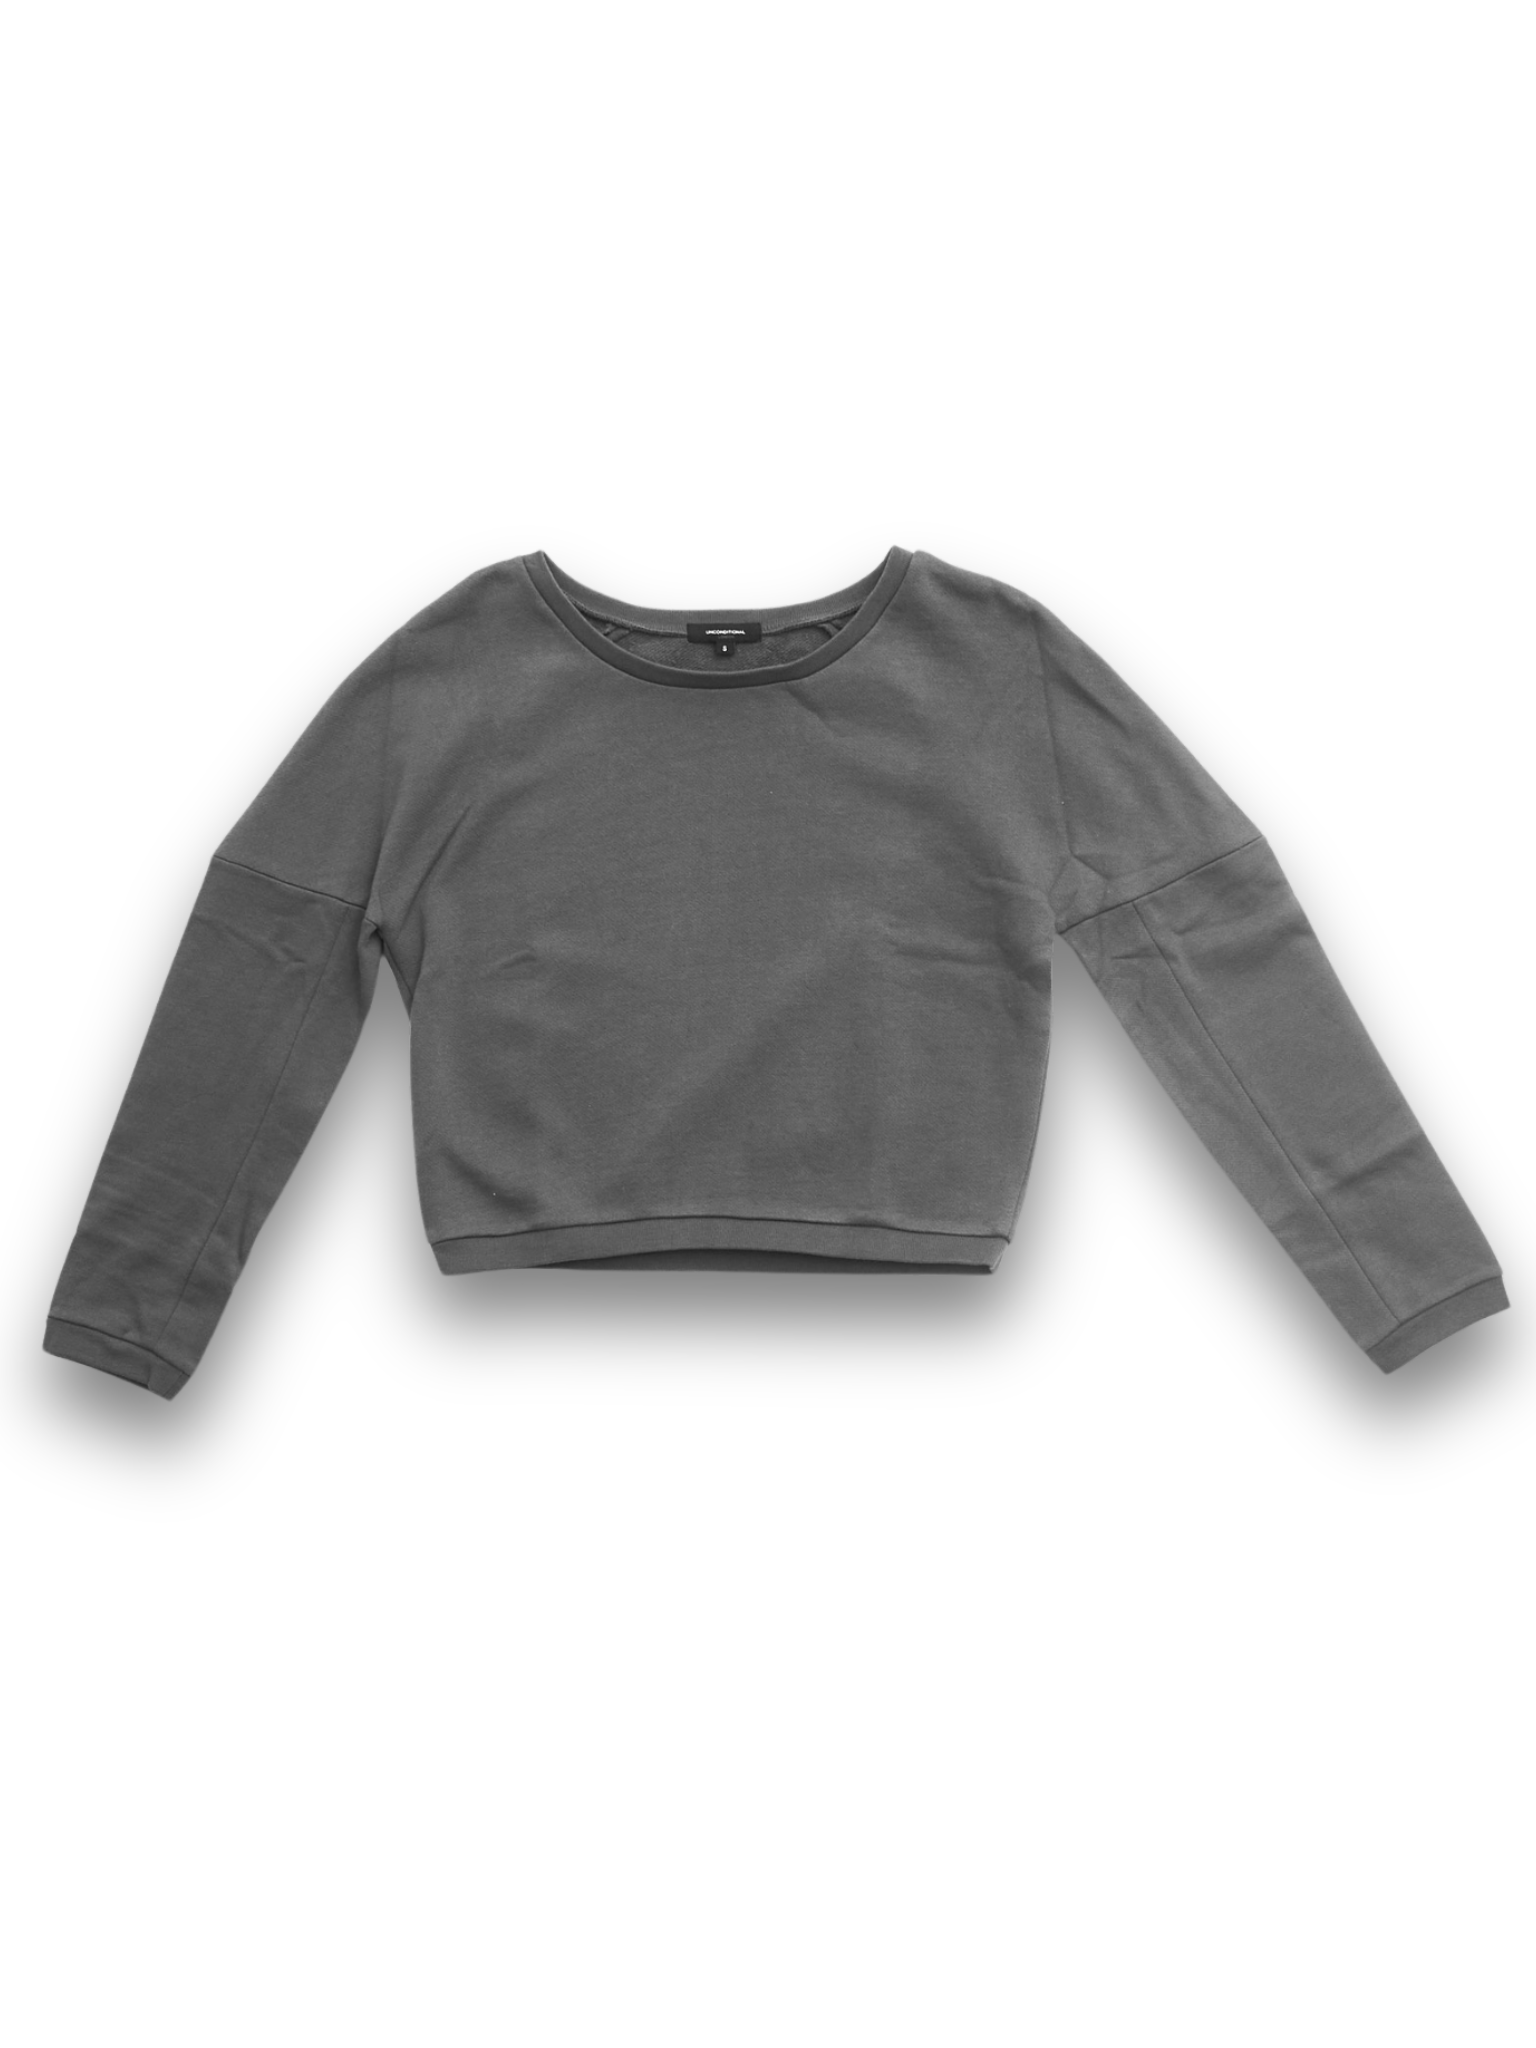 Stone Grey Cropped Long Sleeve Jumper with Hem Detailing